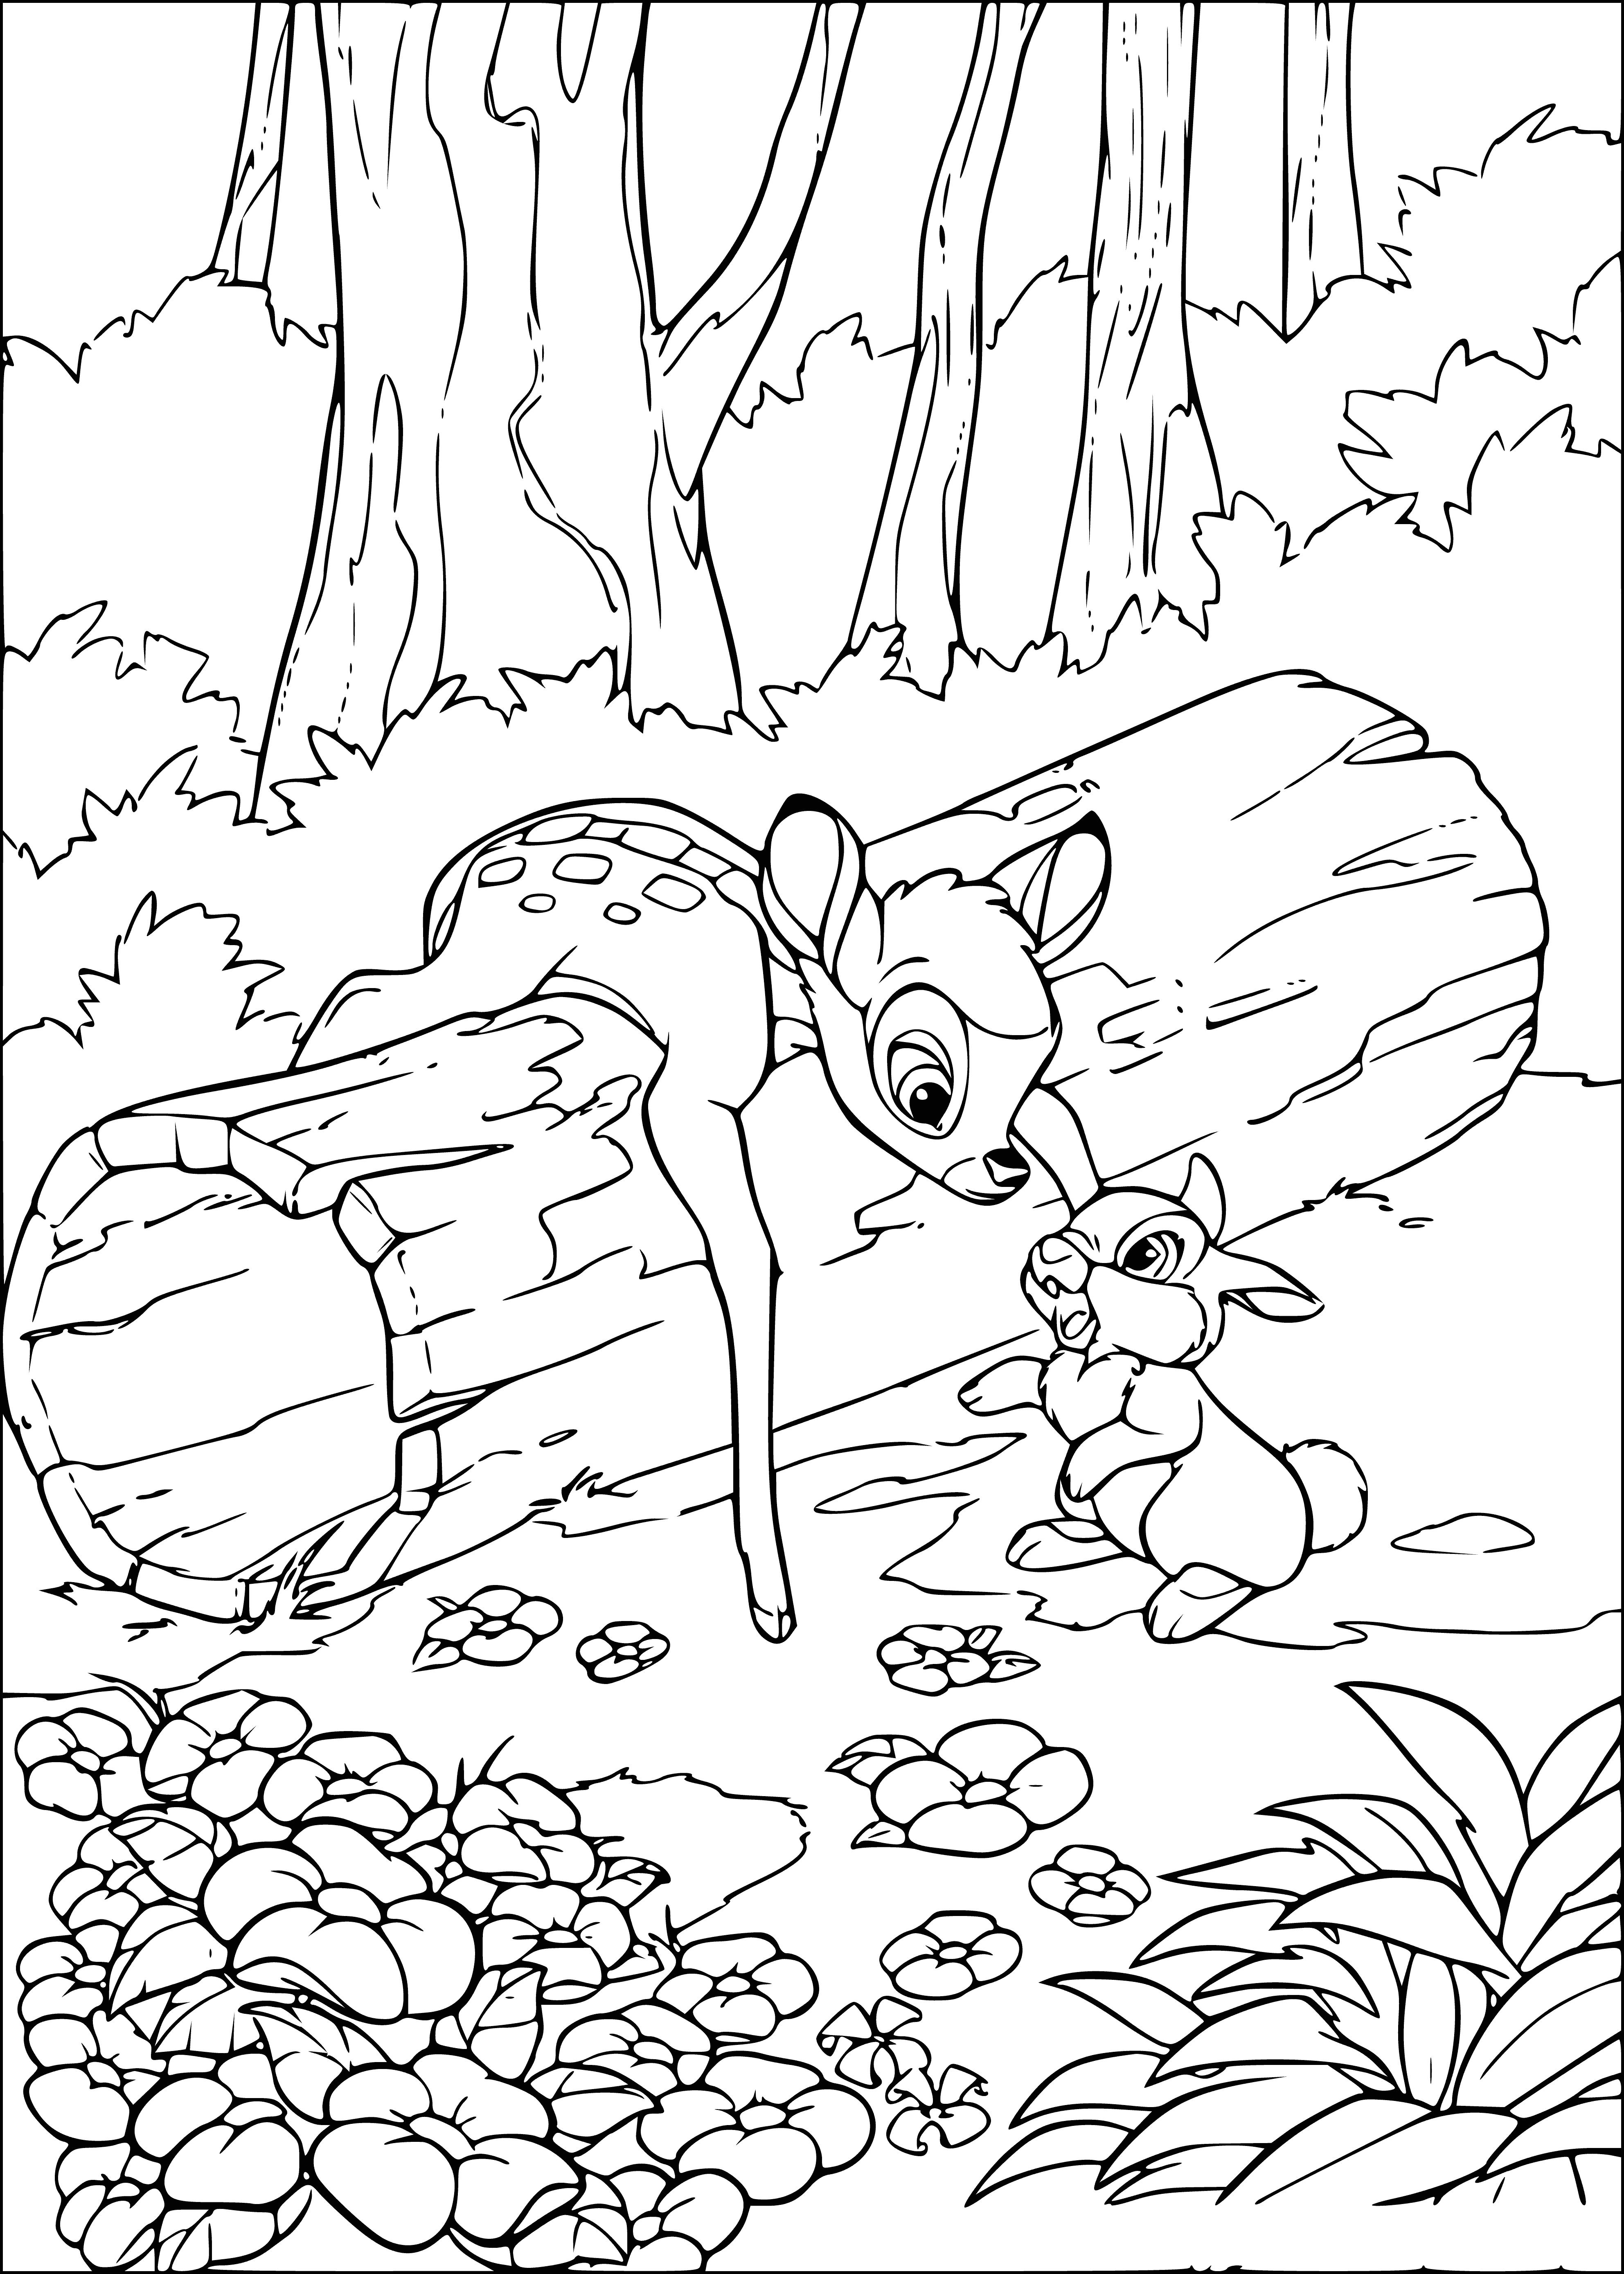 coloring page: Bambi, a white and black deer w/ big eyes, small nose and pointy antlers, walks in a forest w/ trees, leaves and a river.